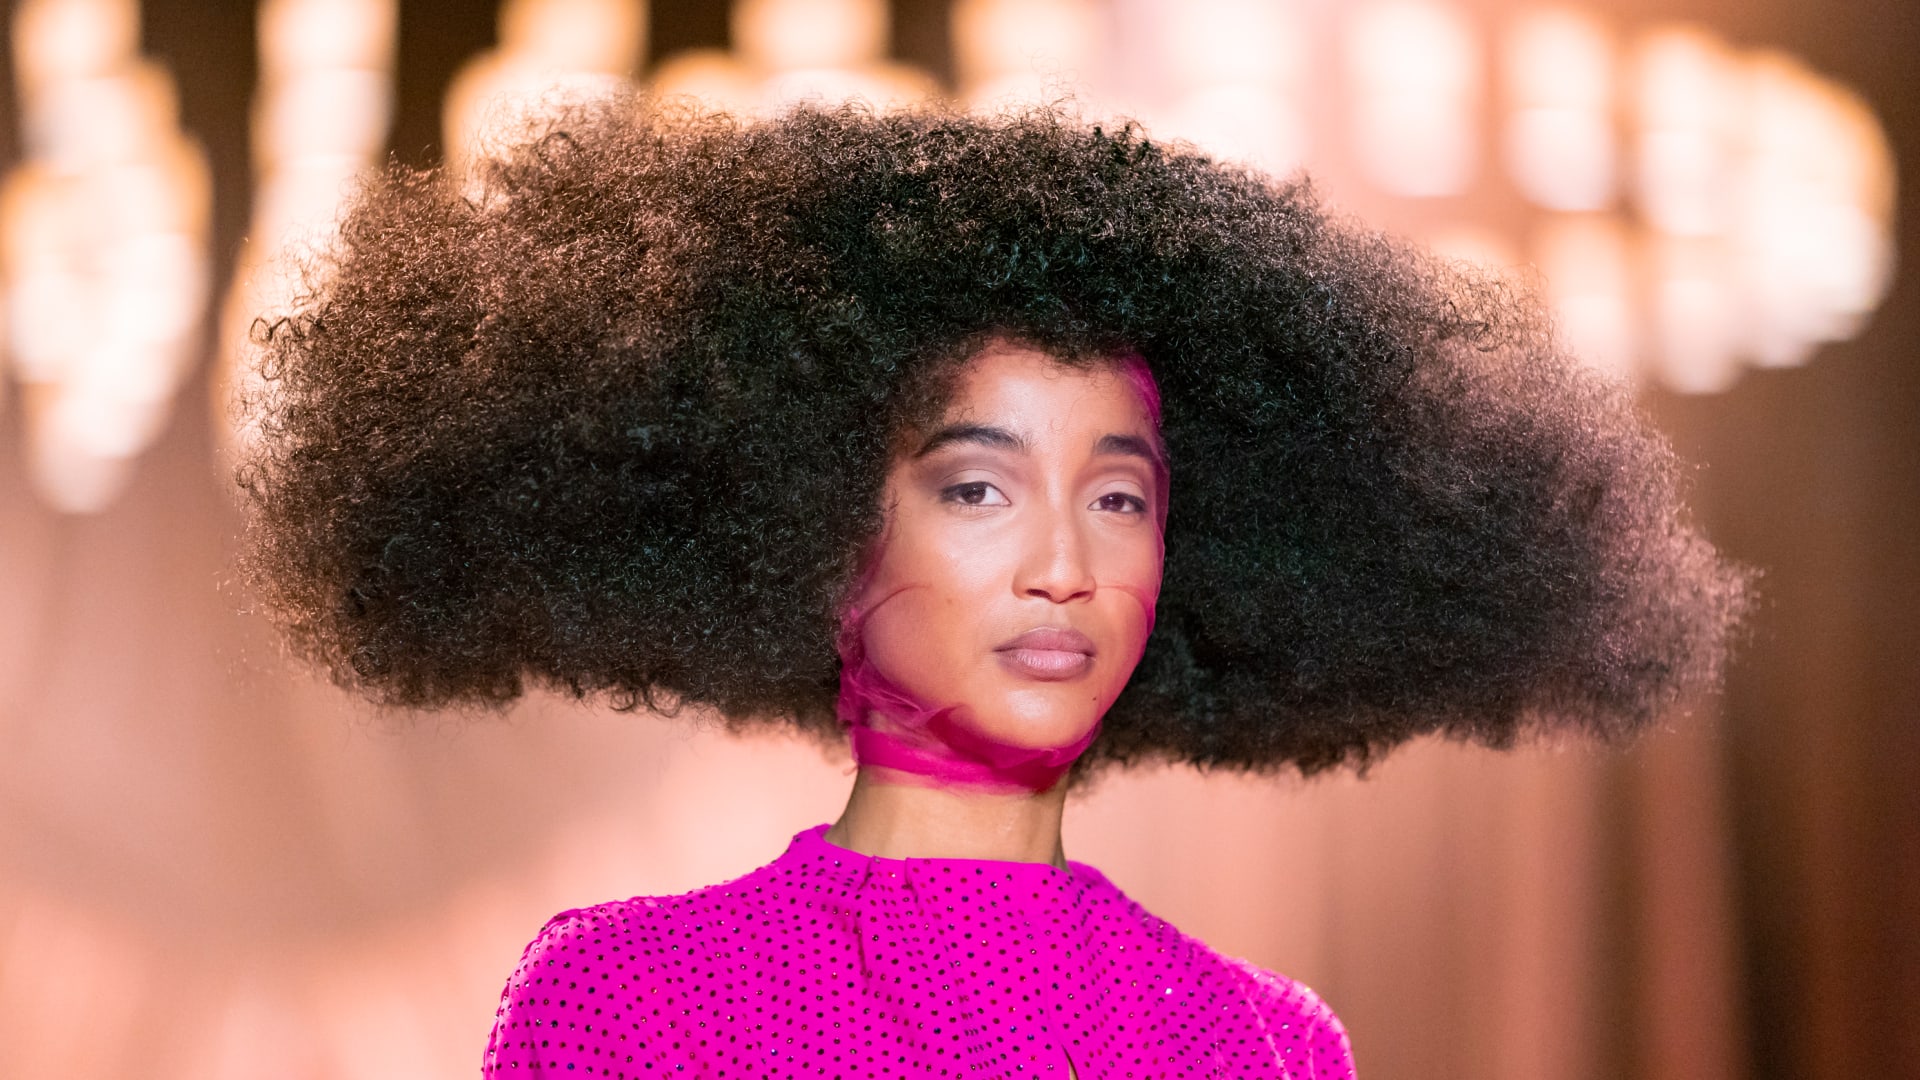 5 STANDOUT FALL 2020 BEAUTY TRENDS FROM NEW YORK FASHION WEEK